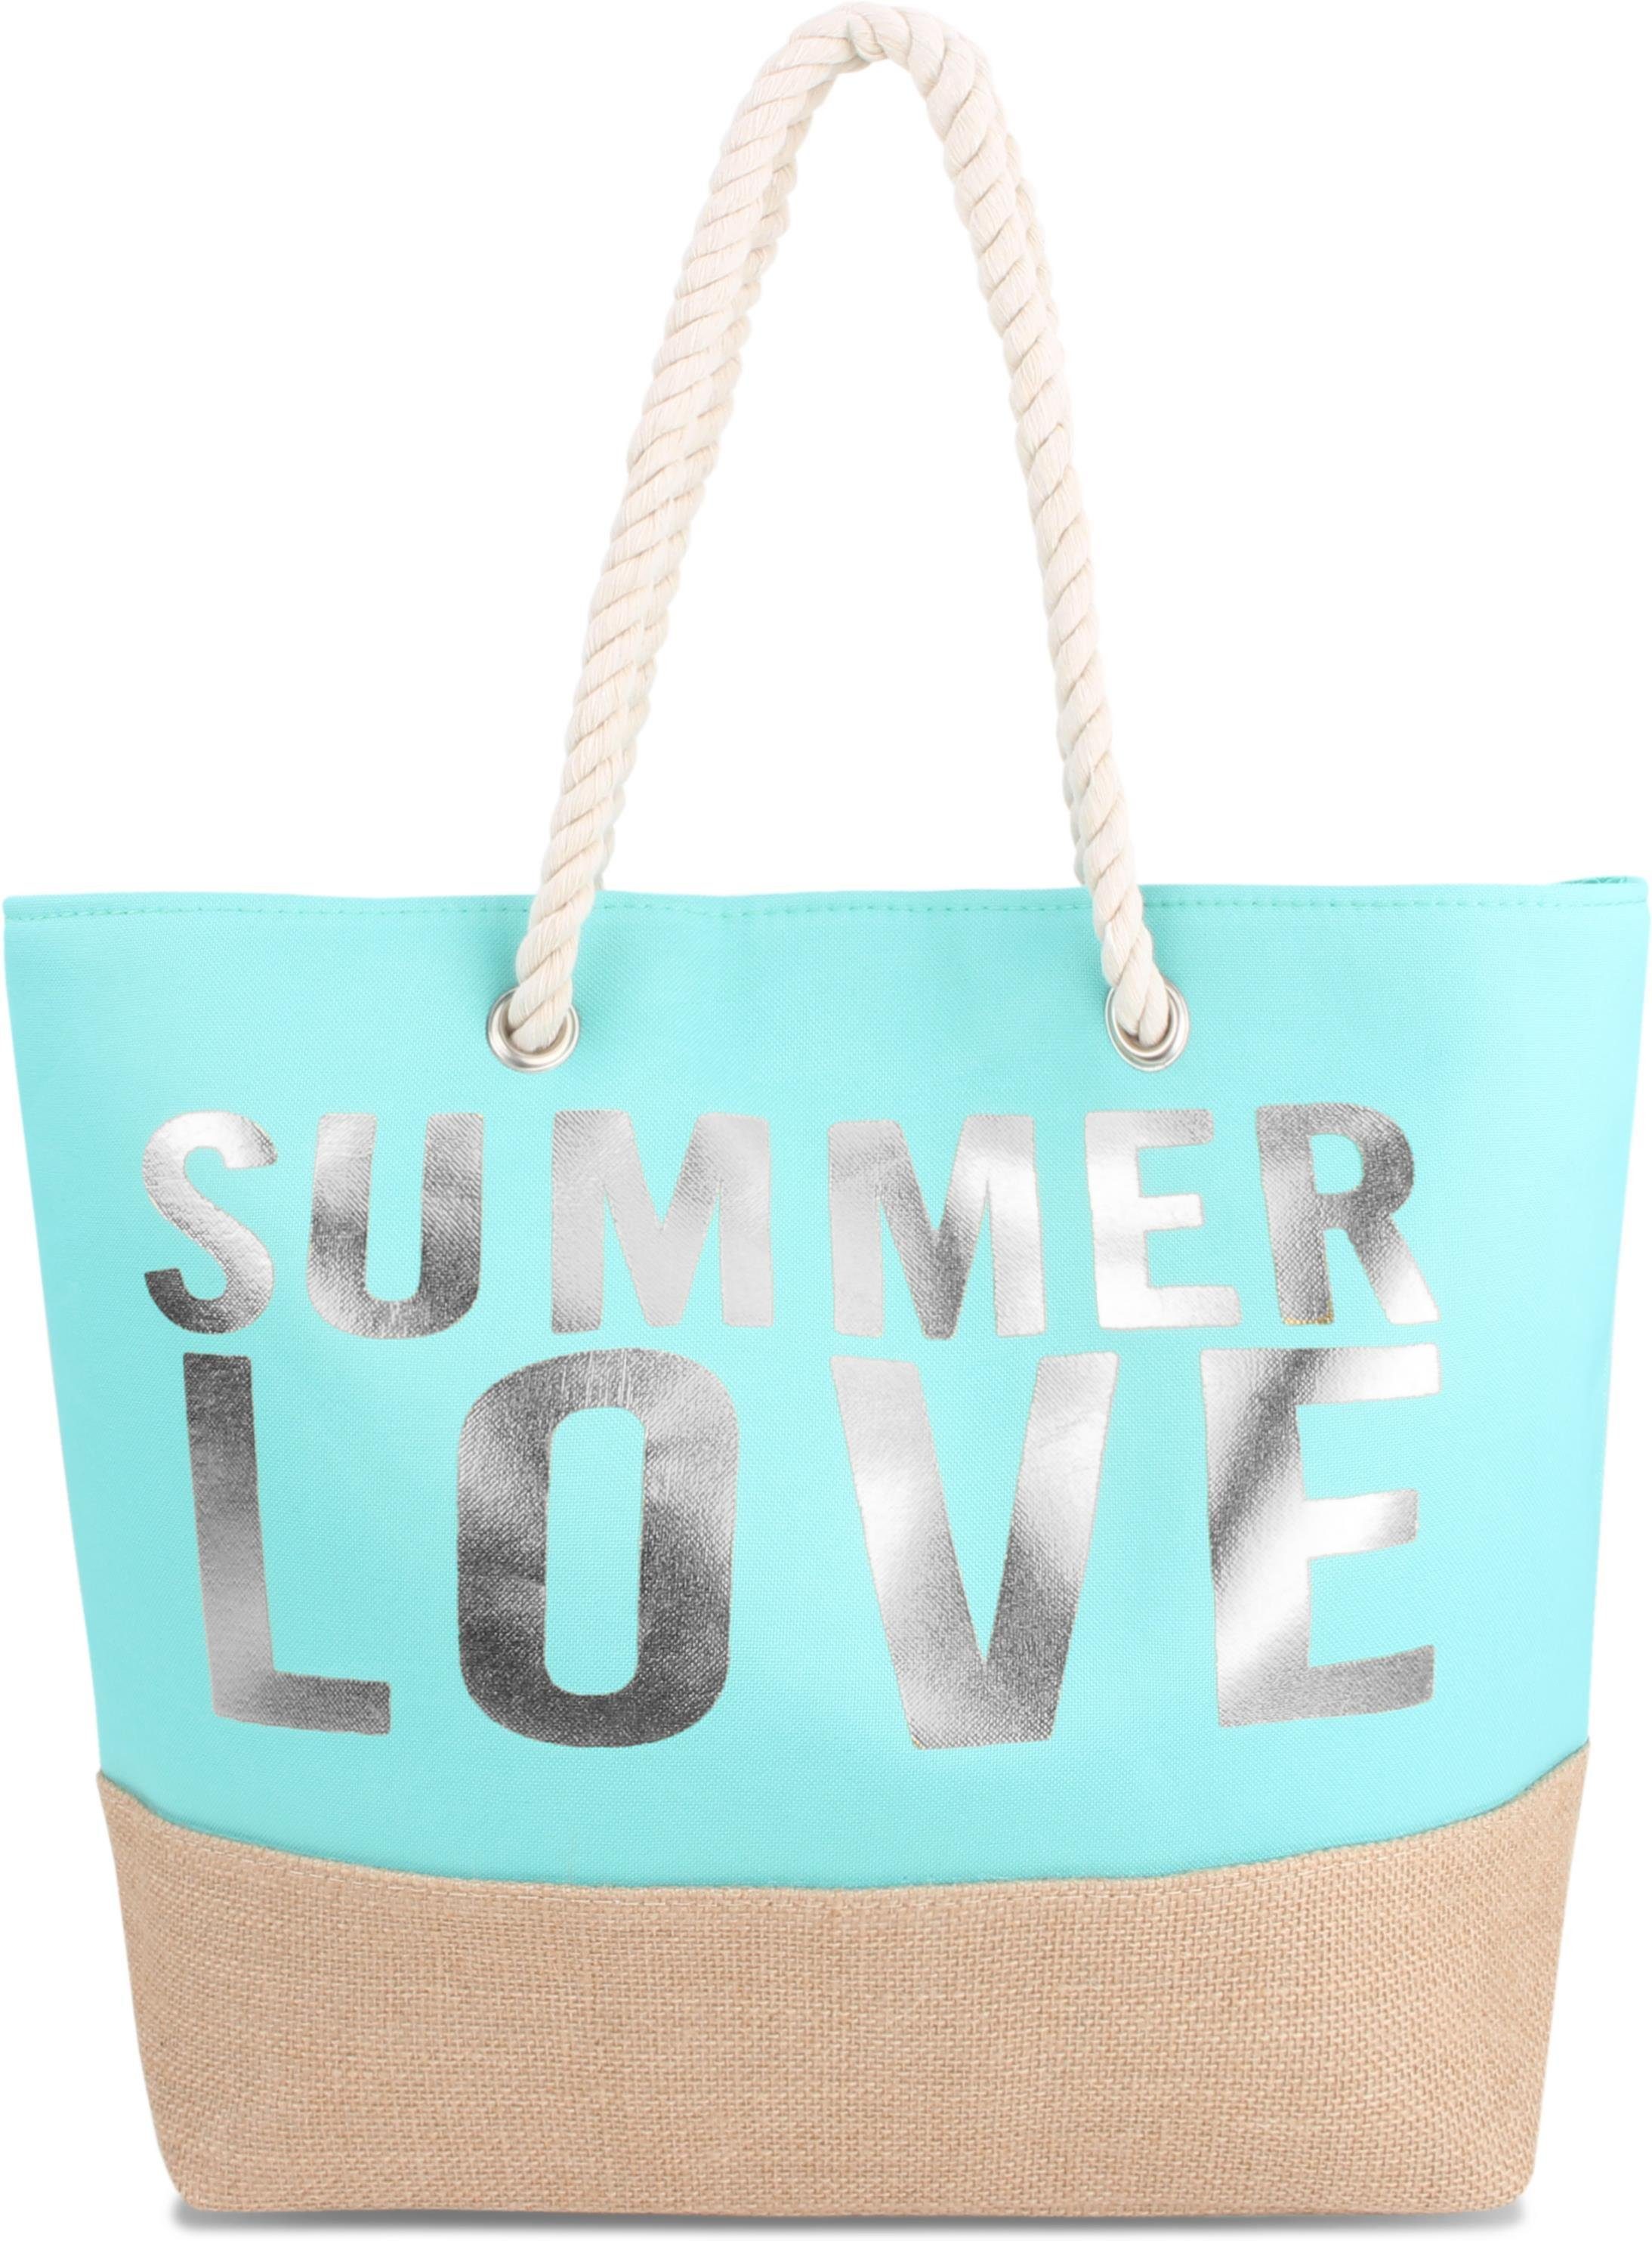 normani Strandtasche Bequeme Sommer-Umhängetasche, Strandtasche, Schultertasche als Henkeltasche tragbar Summer Love Turquoise/Silver